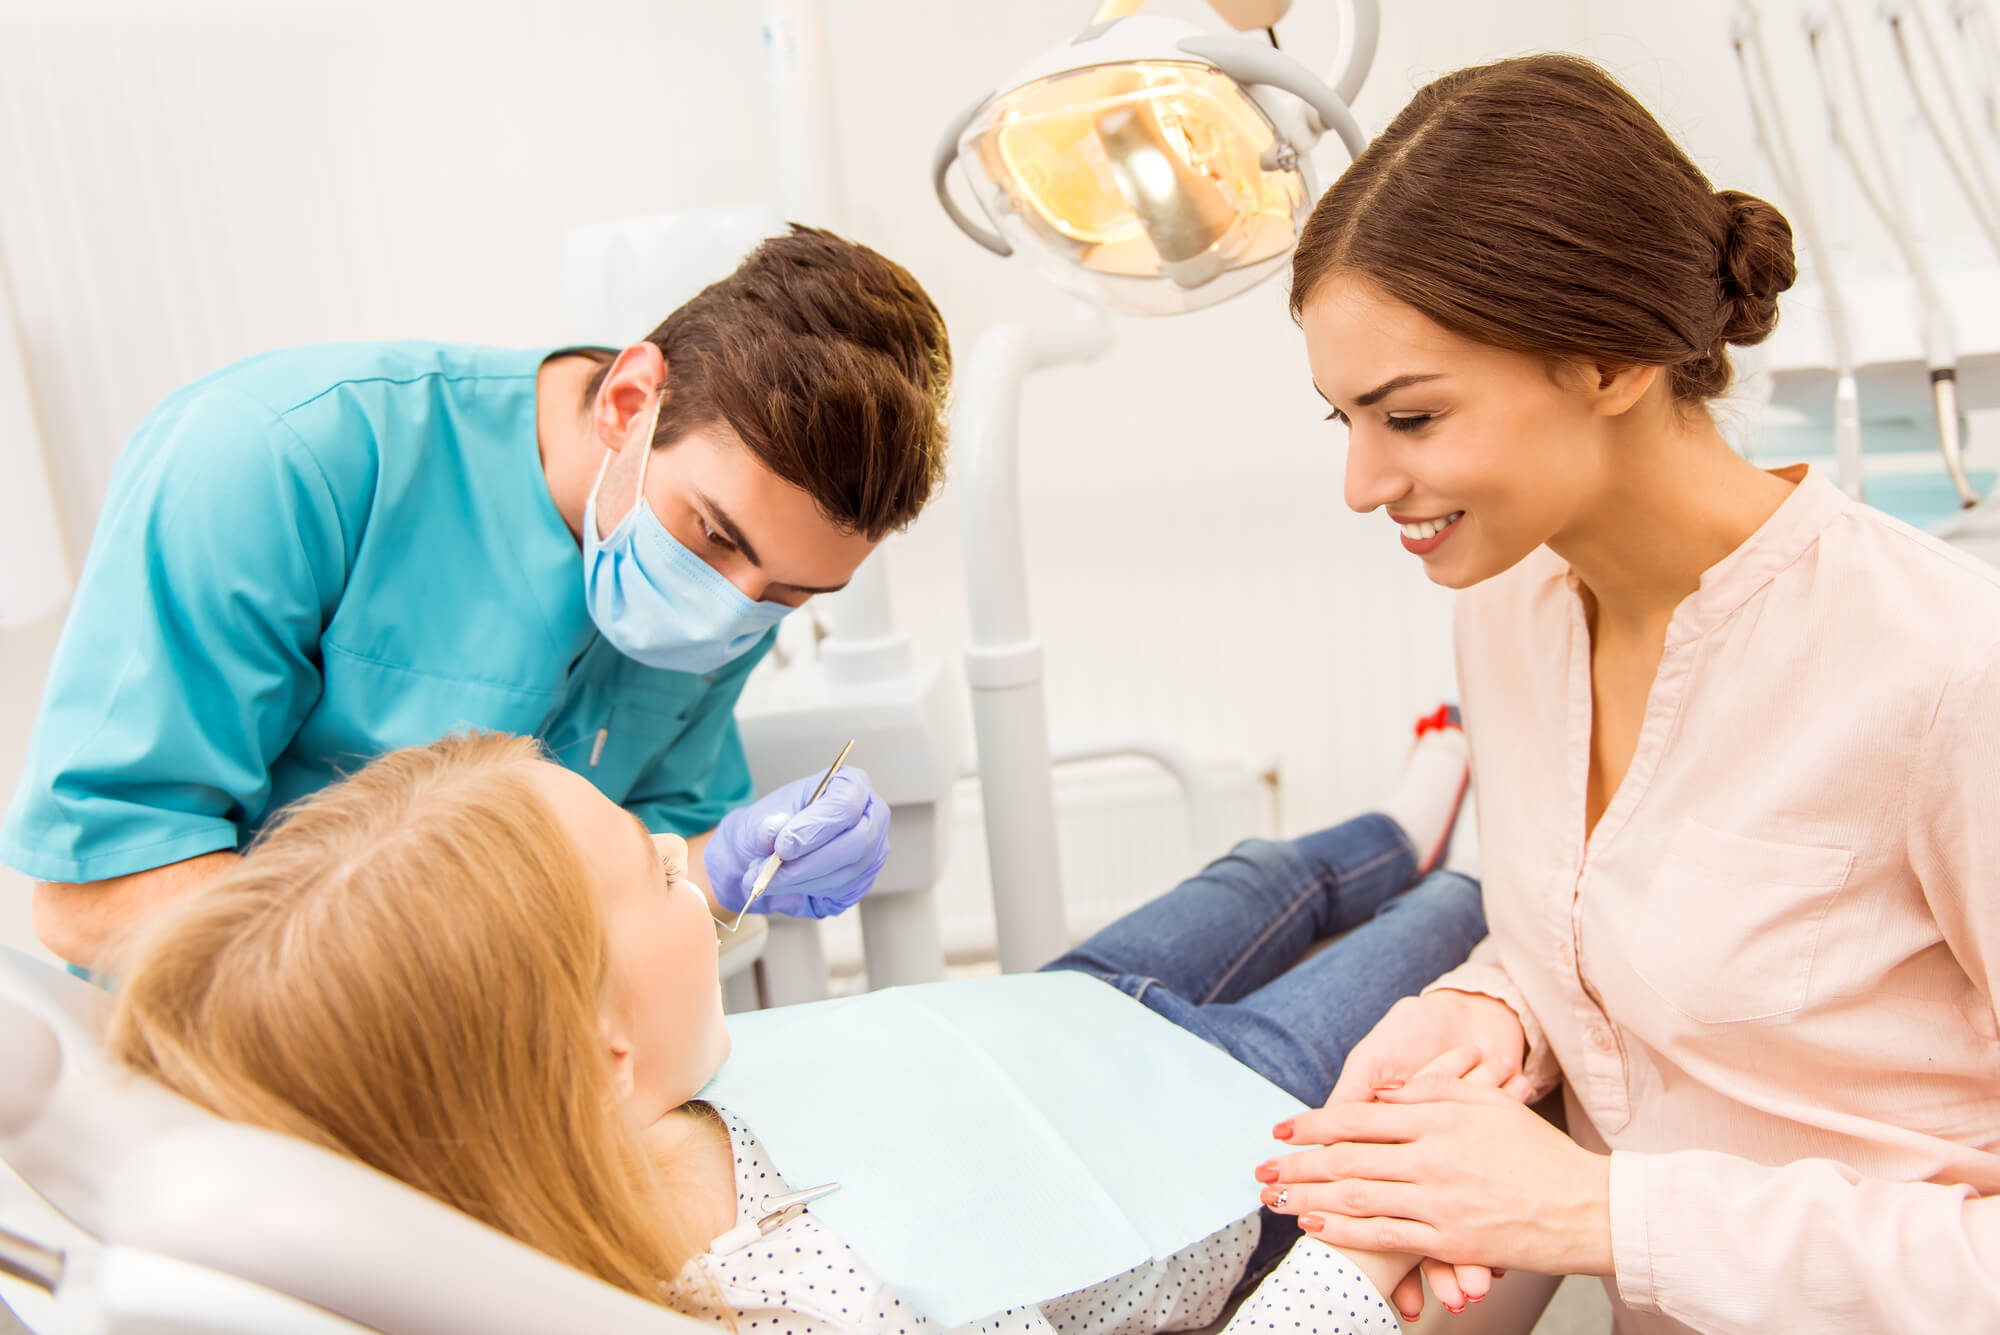 who offers the best cosmetic dentist orlando fl?